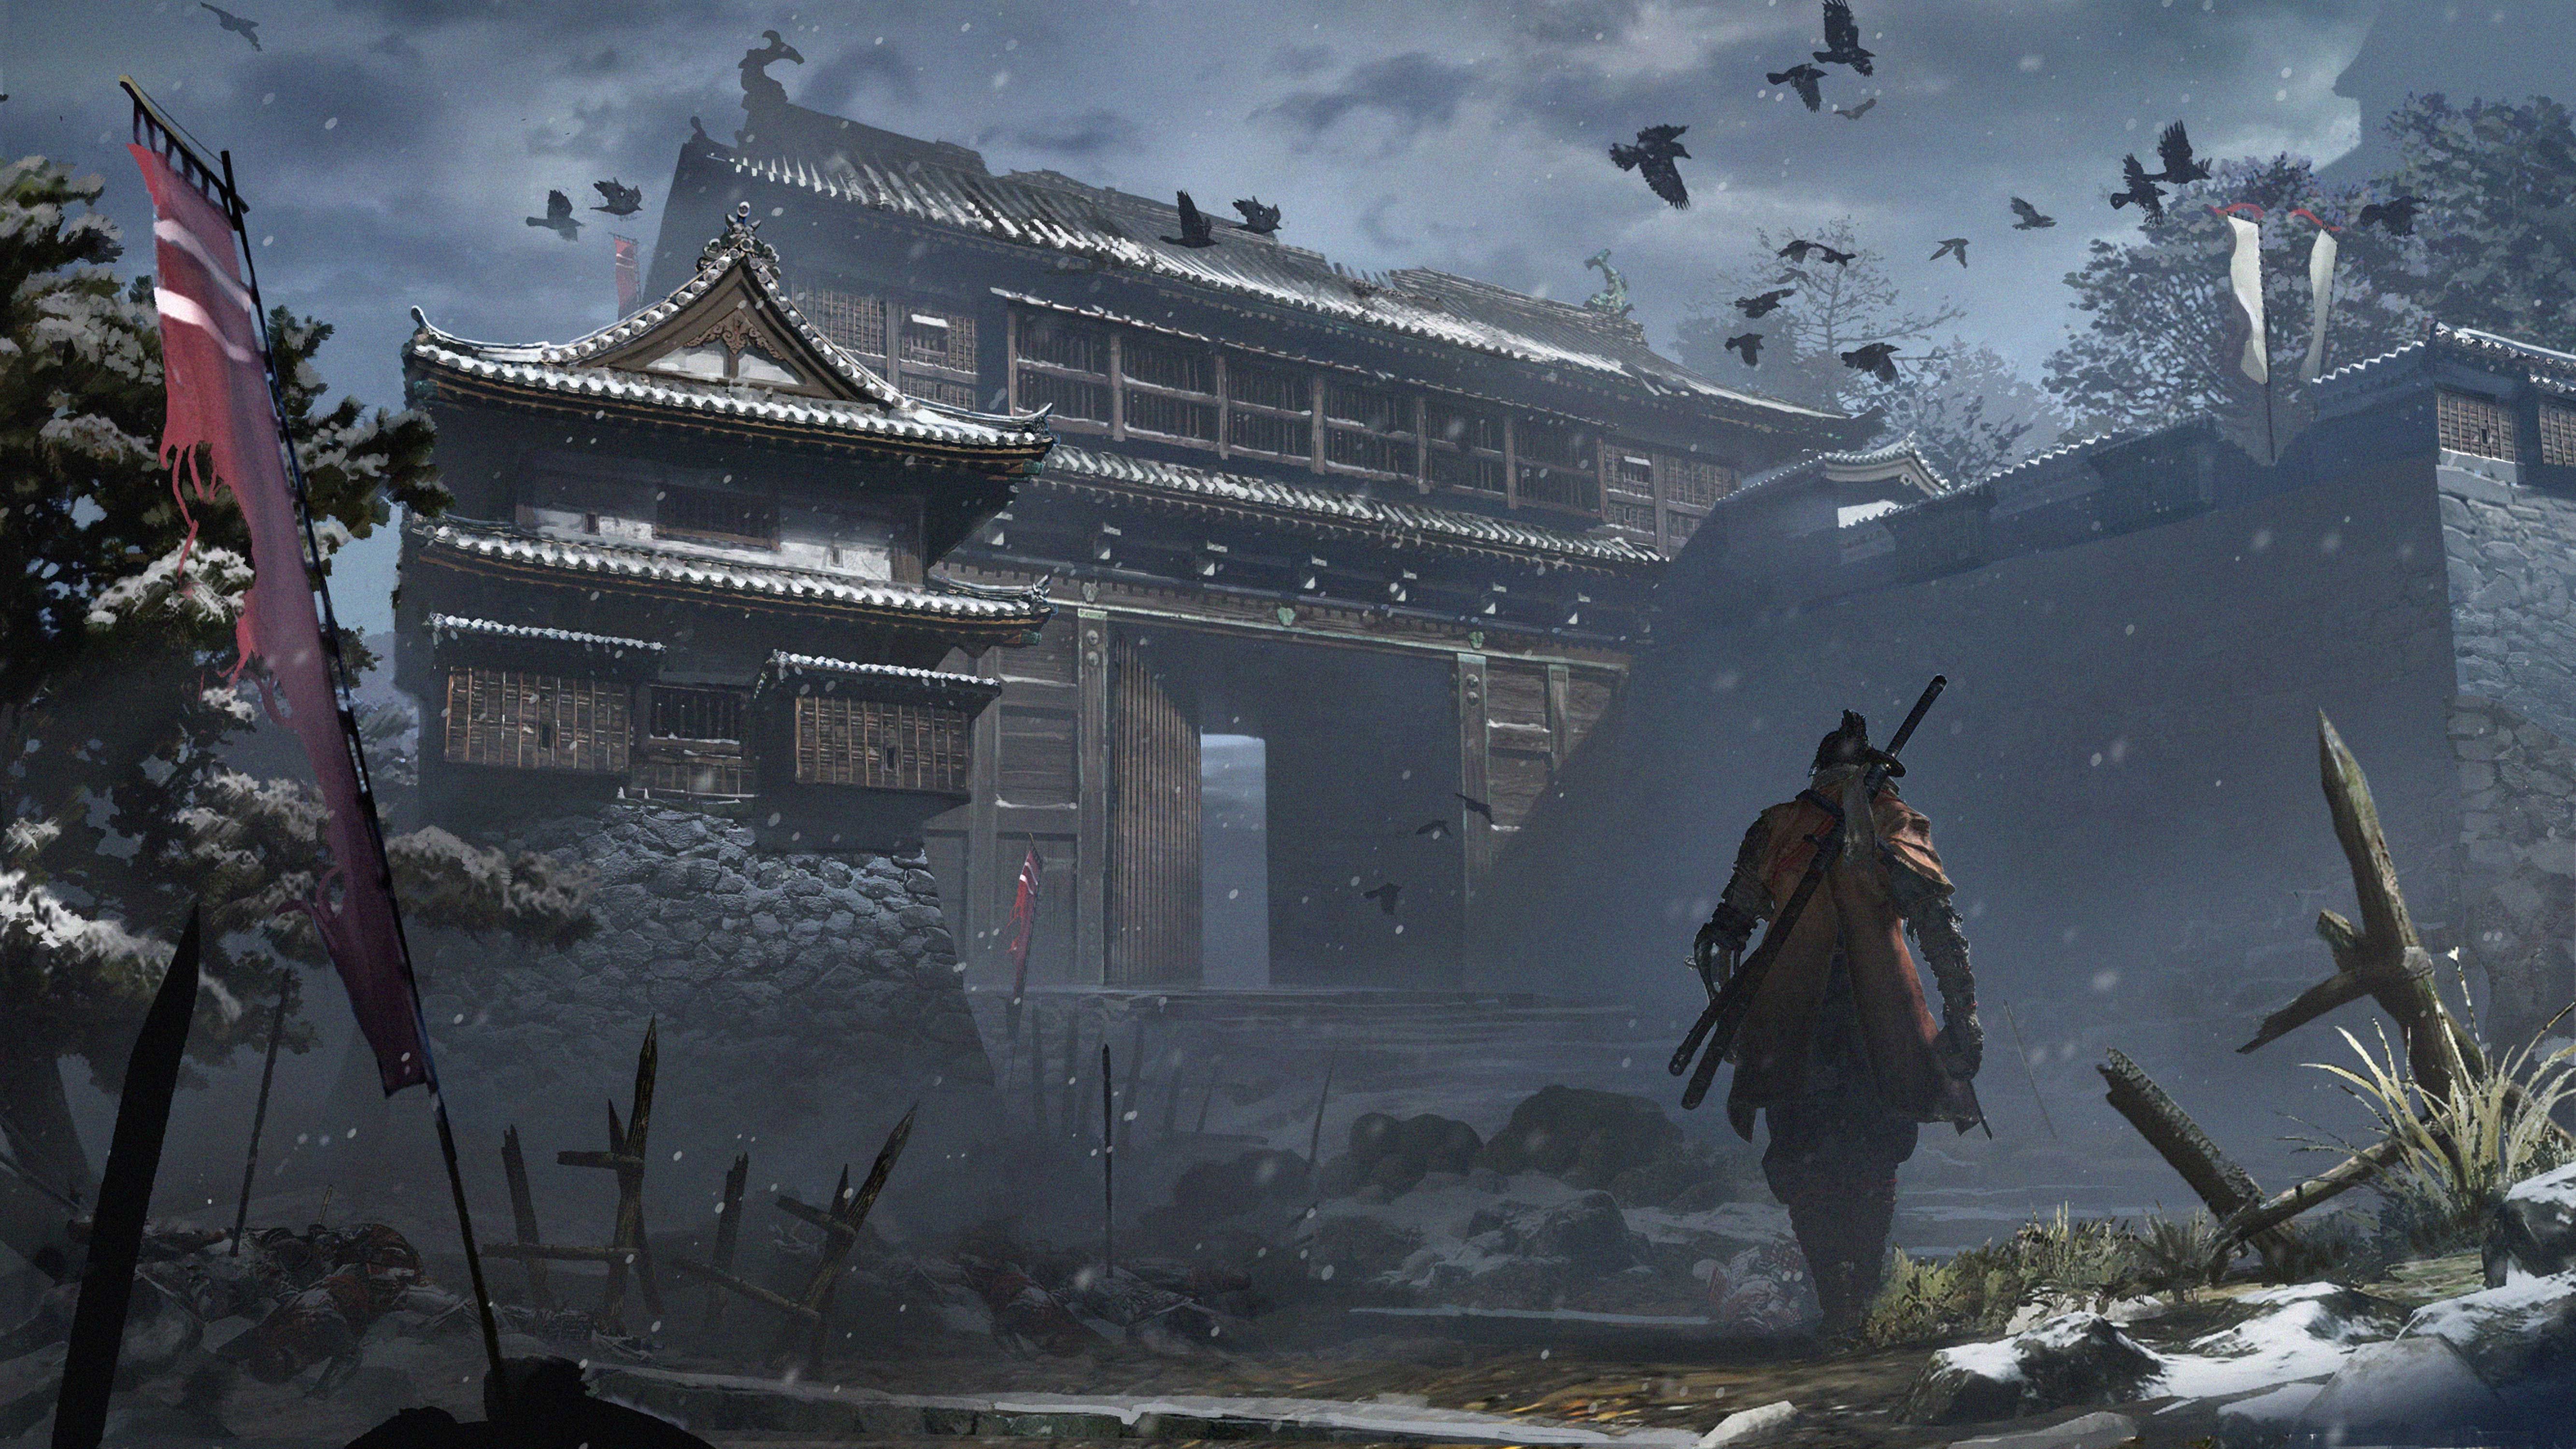 Sekiro, Shadows Die Twice Concept Art. For Students: Visual